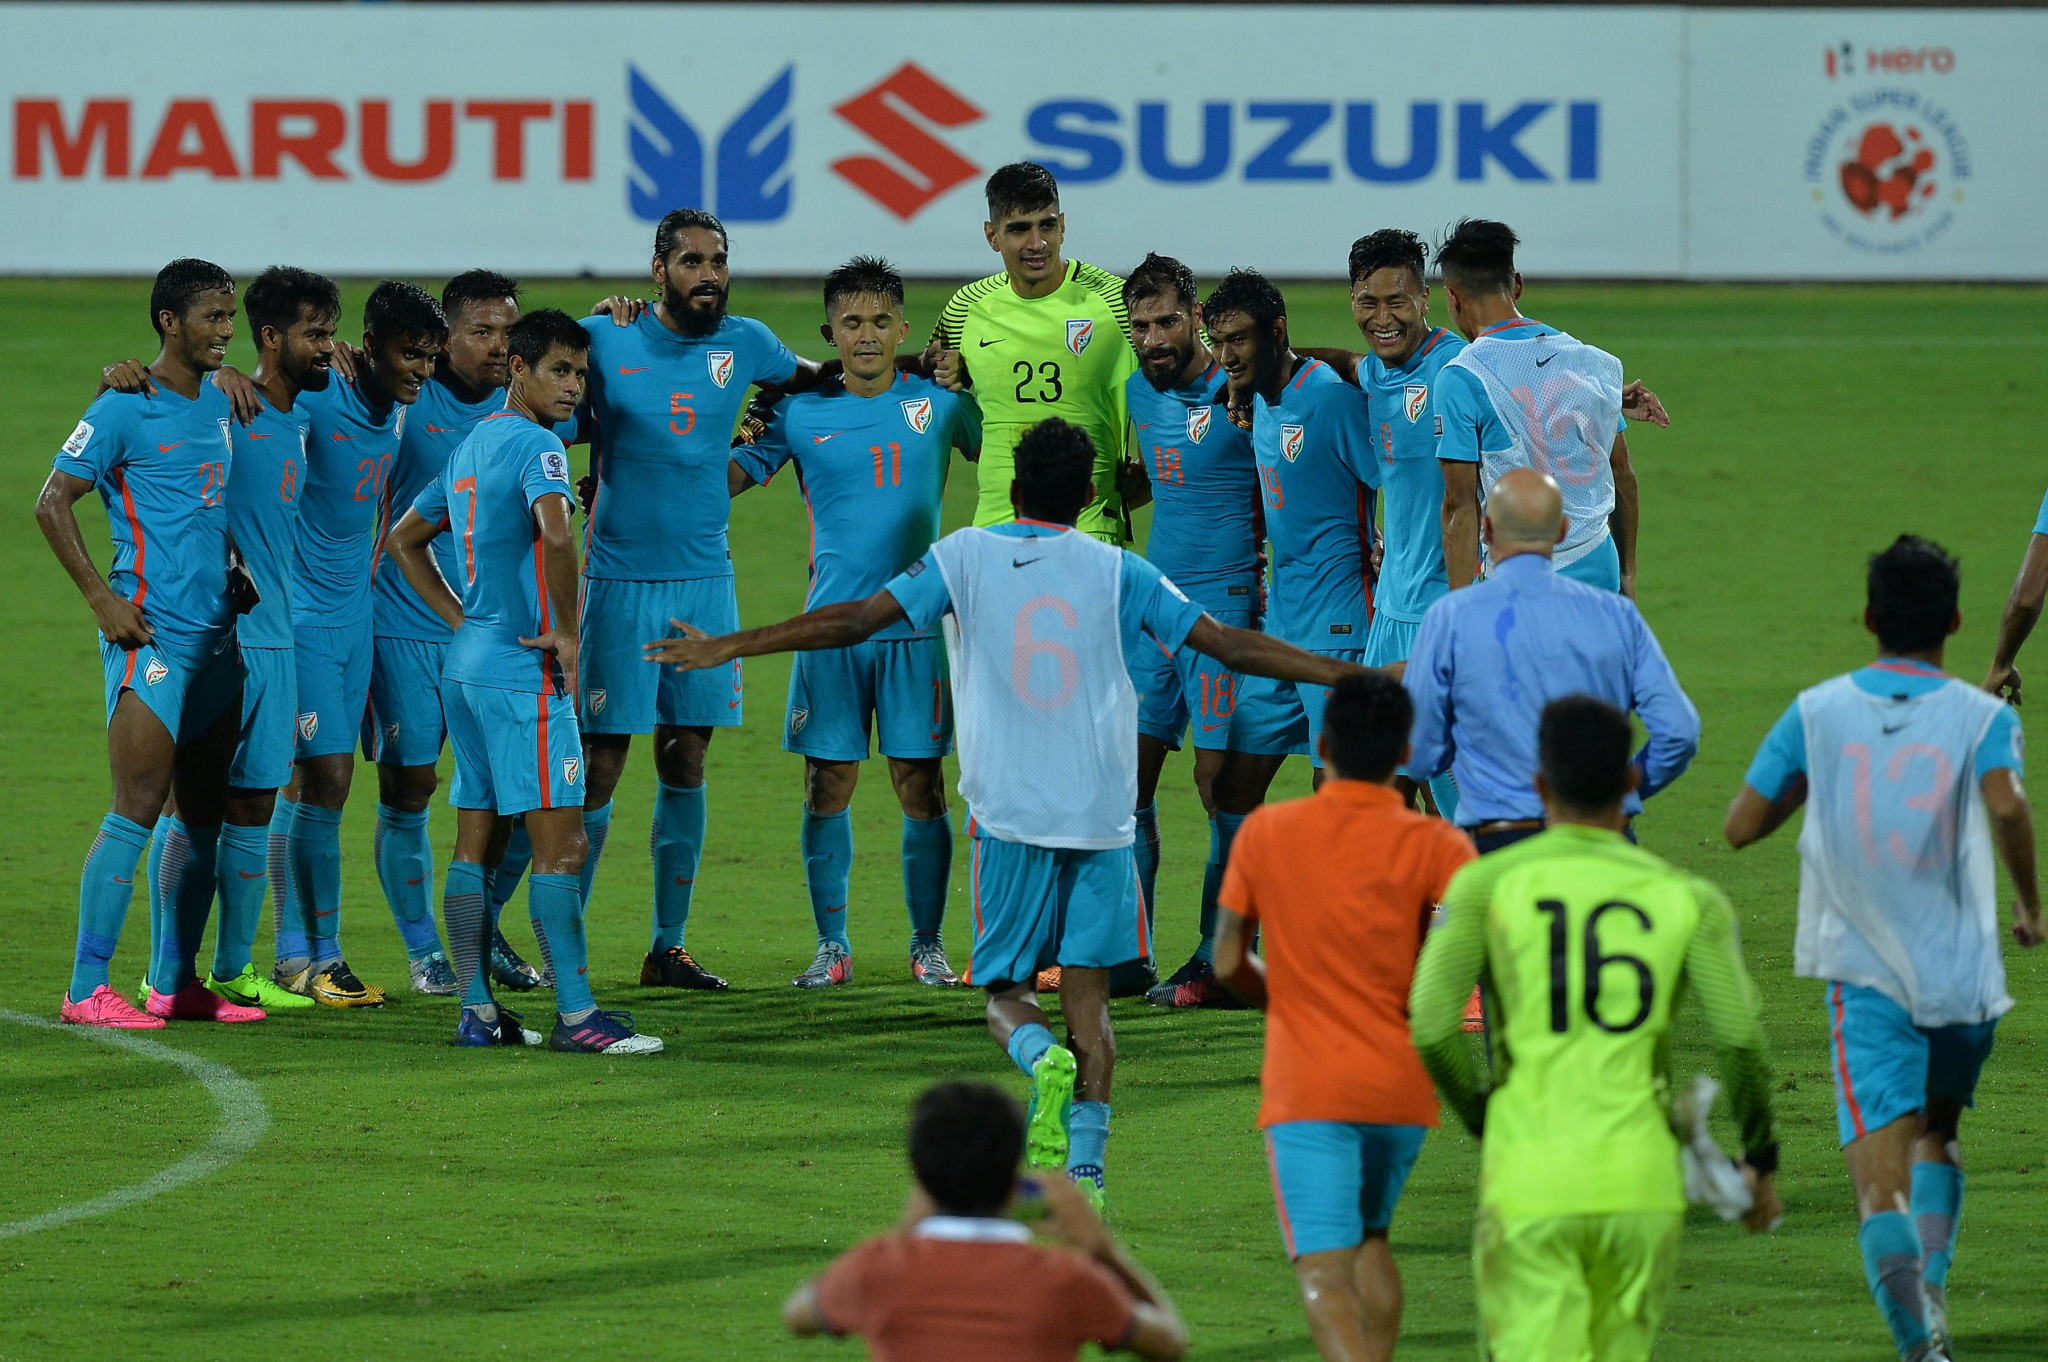 India currently sits 104th in the FIFA world rankings, just 10 places below their all-time best ©Getty Images